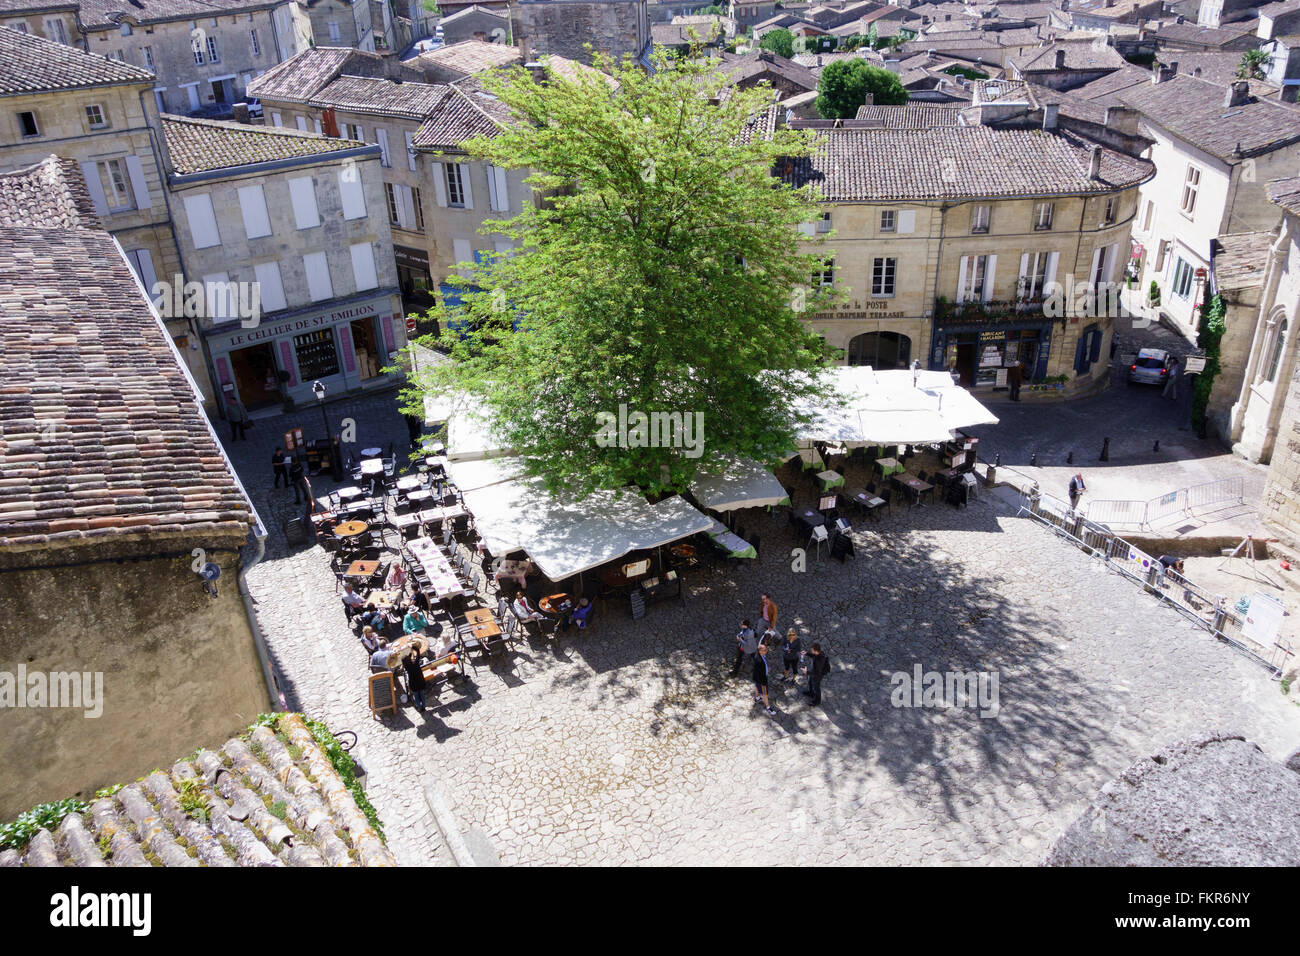 People dining outdoors in the Place de L'Eglise Monolithe, Saint-Emilion, Gironde, France Stock Photo